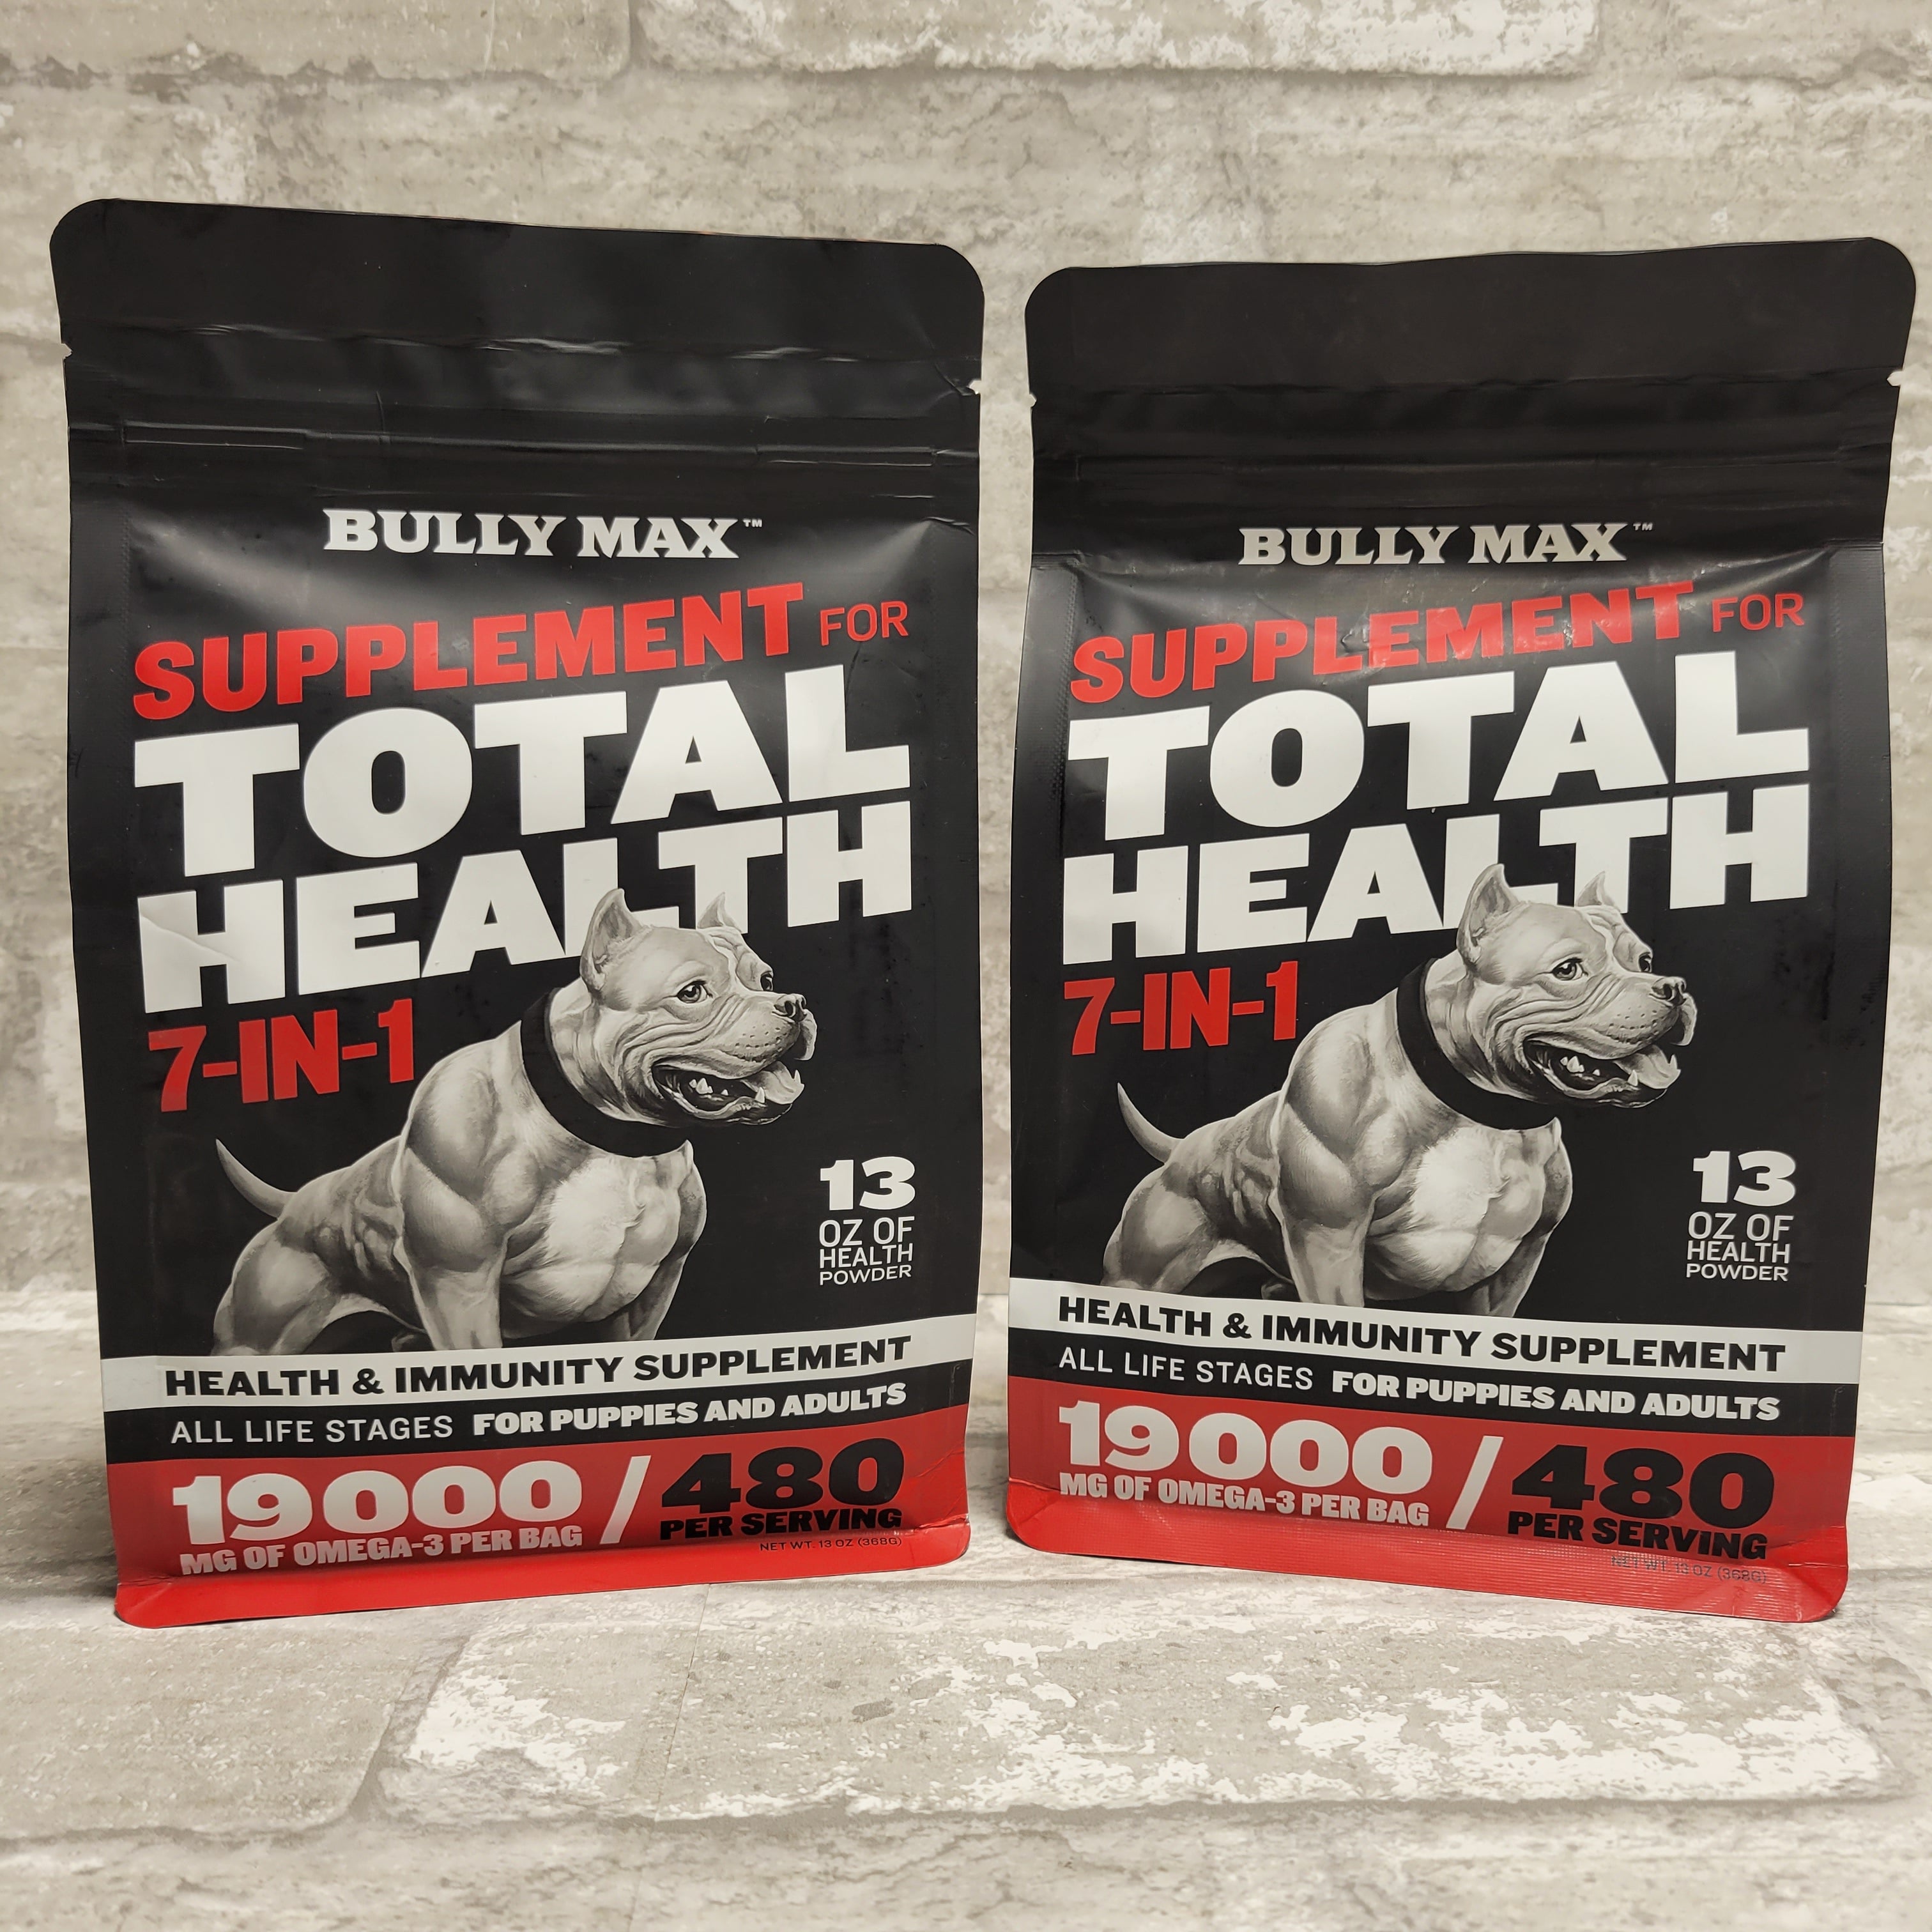 Bully Max Supplement for Total Health 7-IN-1 13oz, Lot of 2 (8045141098734)